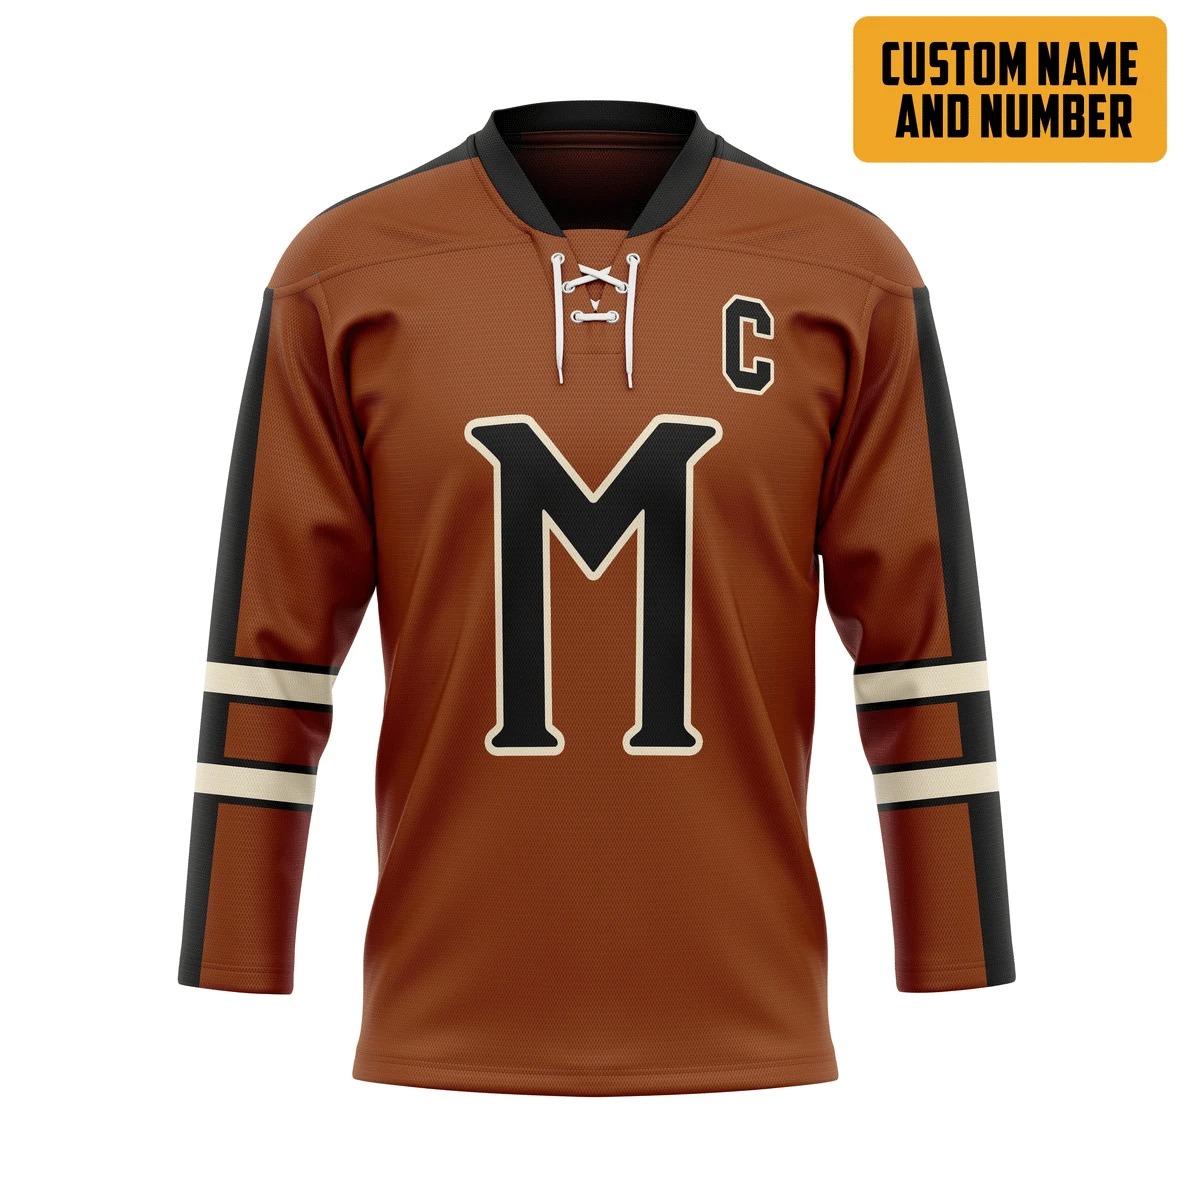 The hockey jersey is one of the most important items to have as a sports fan. 111